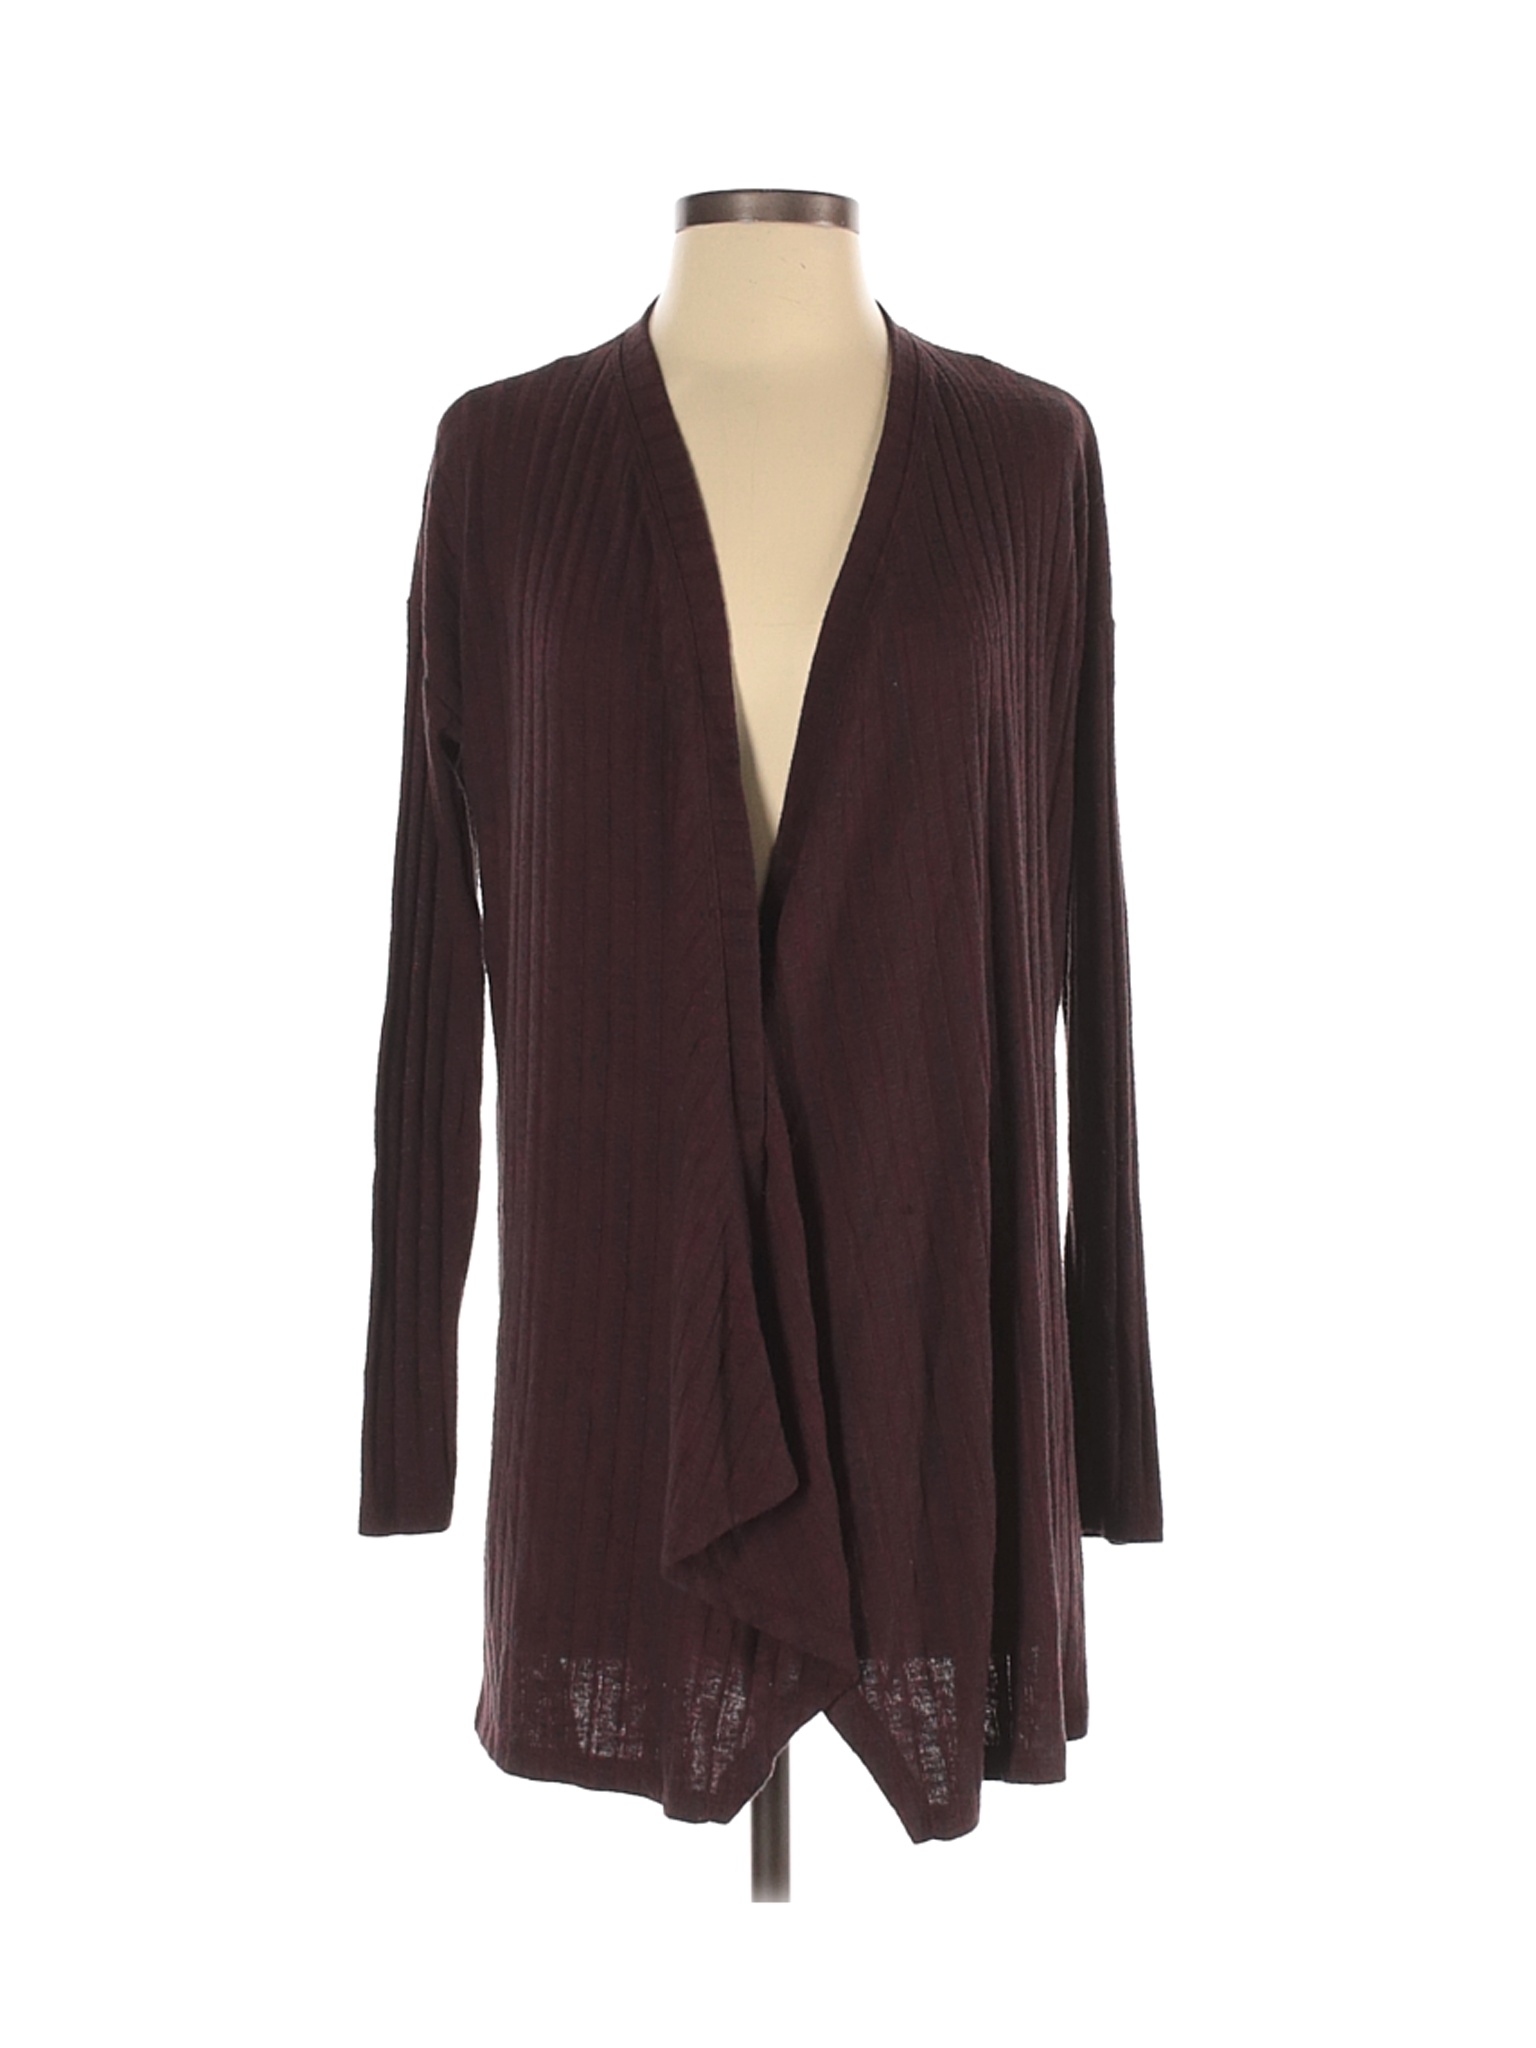 American Eagle Outfitters Women Brown Cardigan XS | eBay